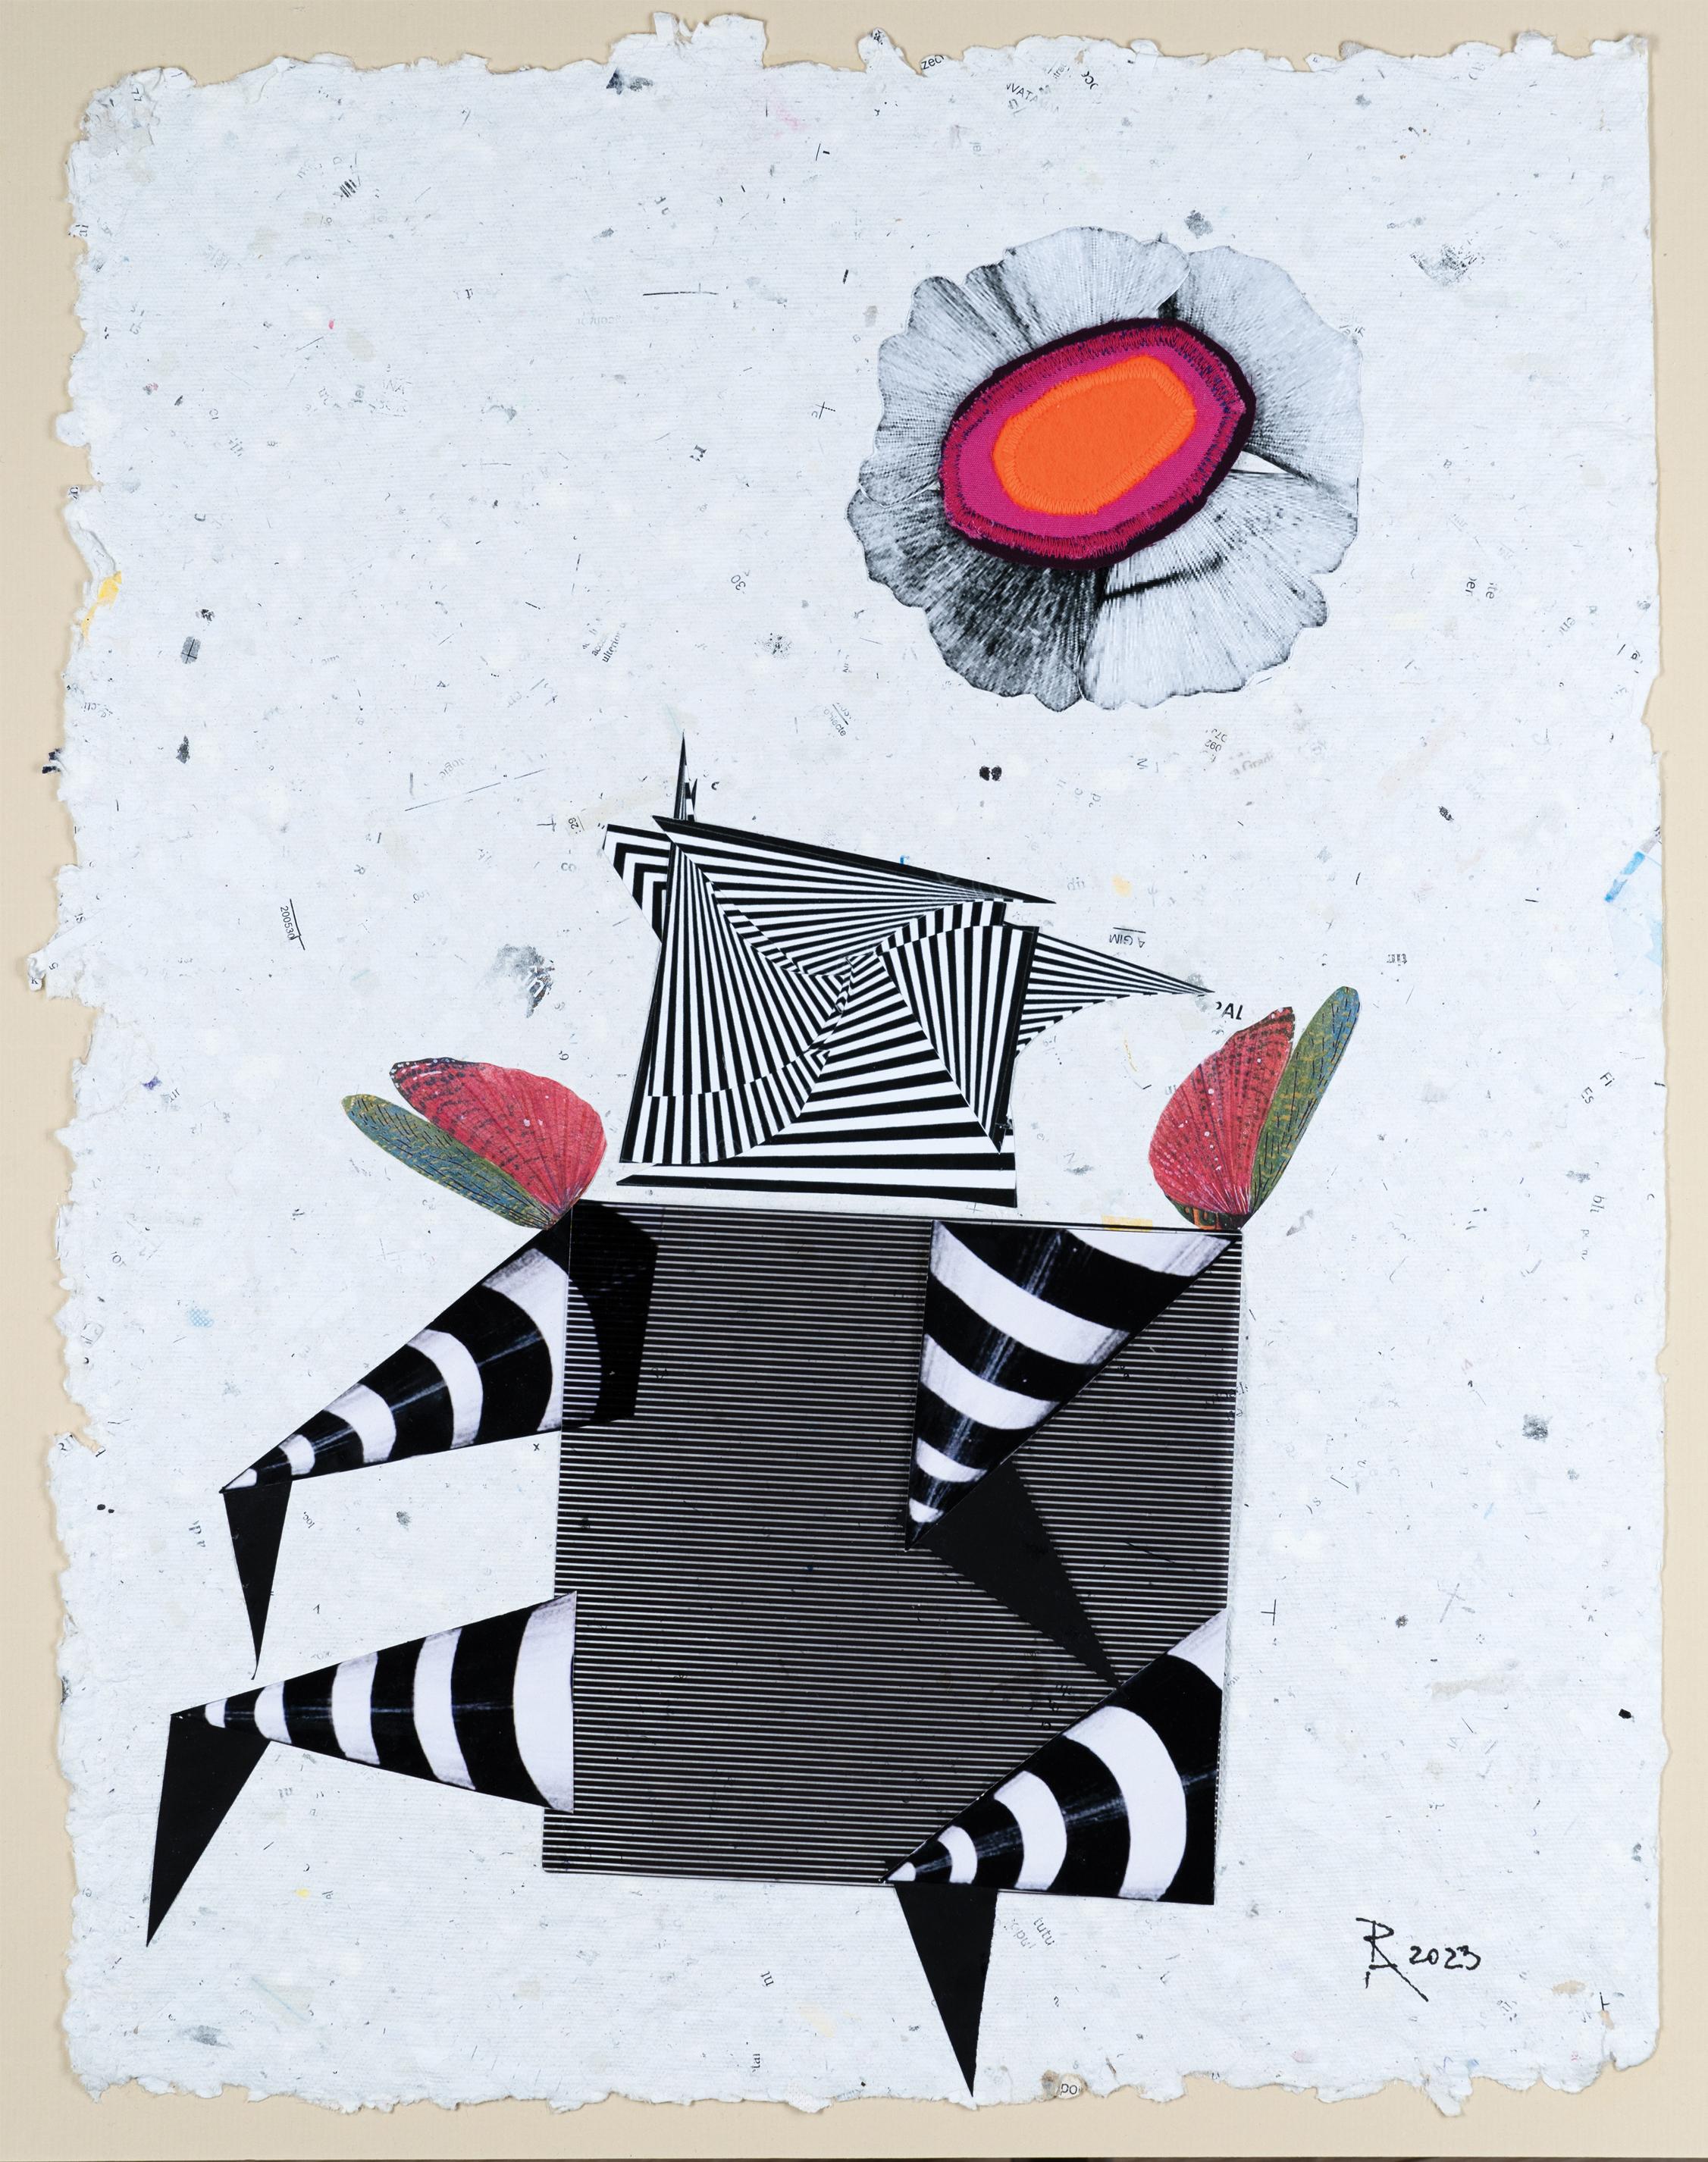 The Flight - Collage, White, Red, Black, Contemporary Art, Surrealist